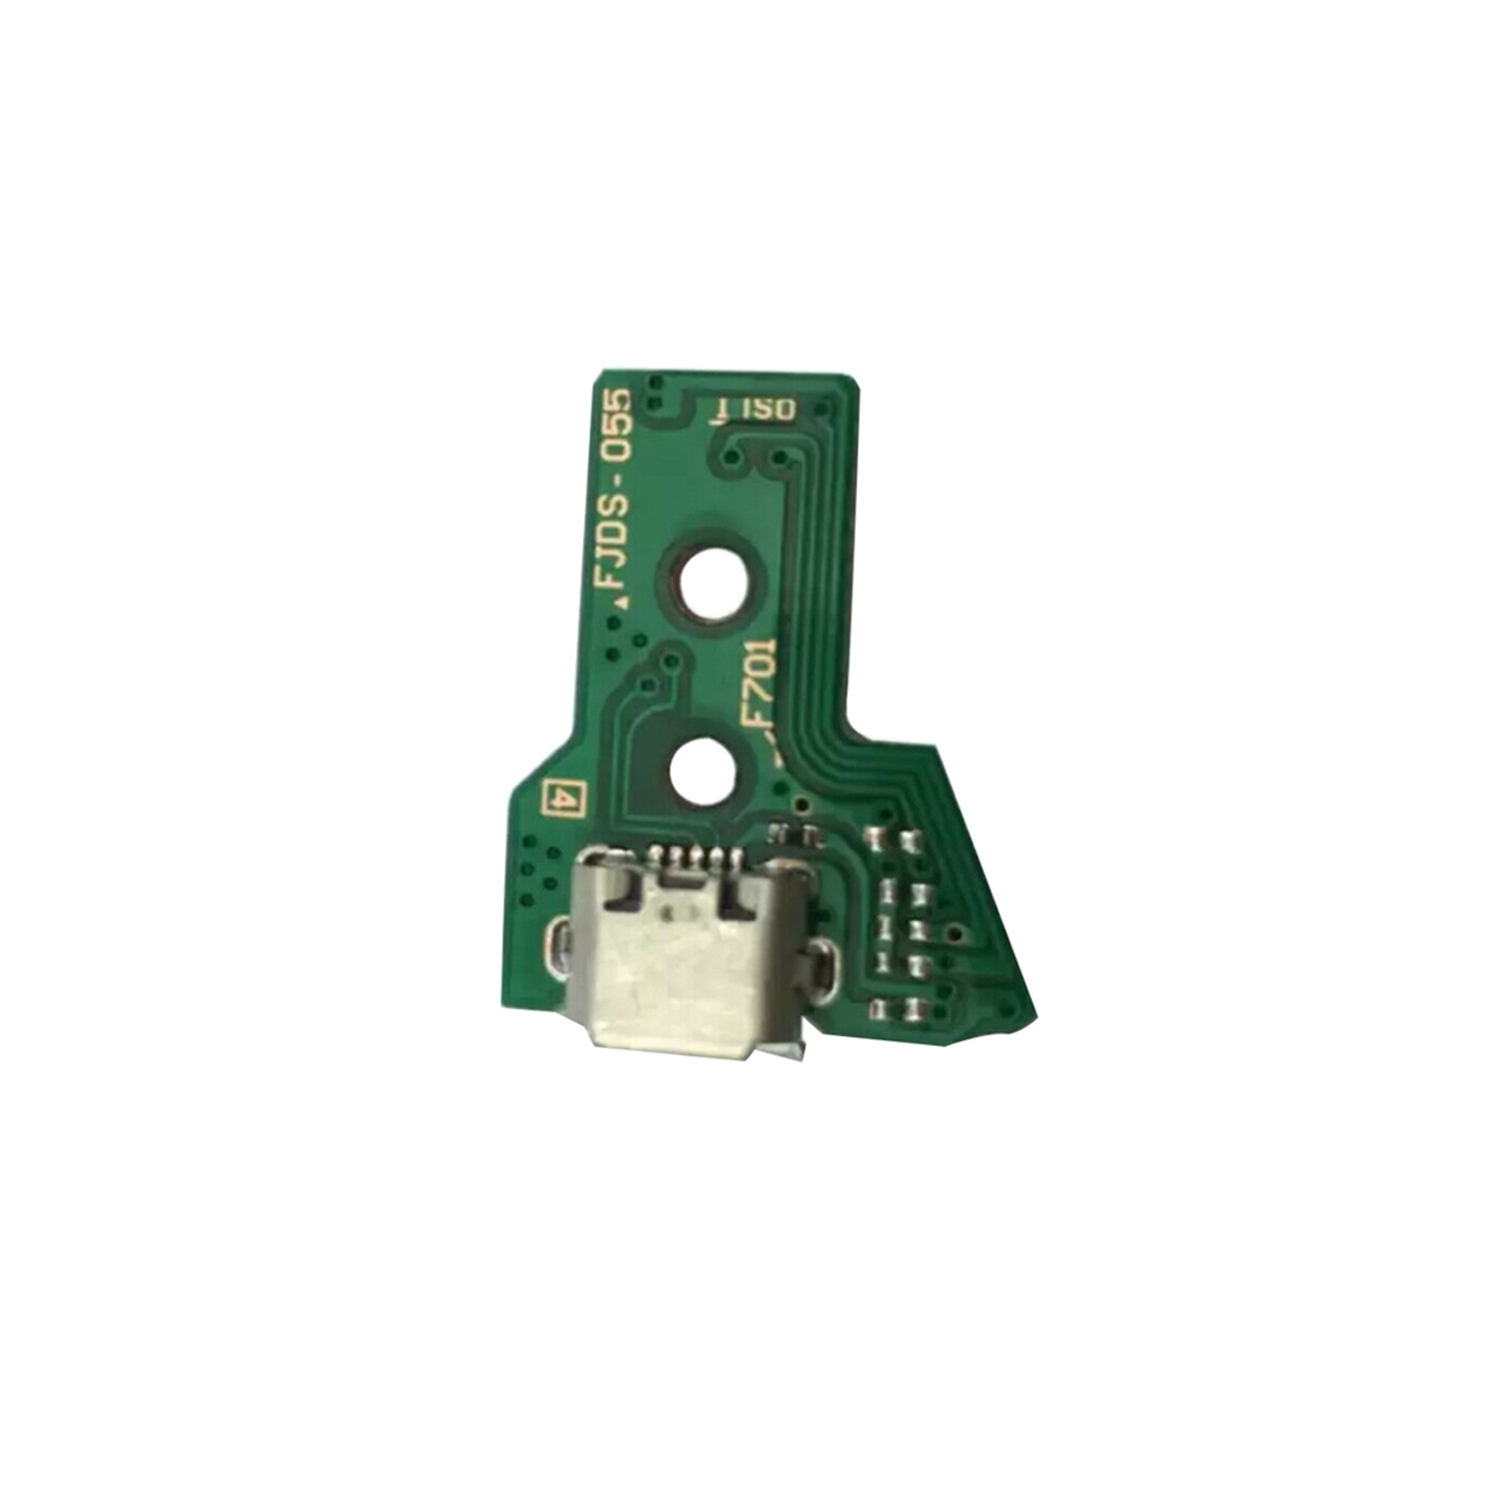 Replacement USB Charging Port Socket Board With 12 Pin Flex Cable JDS-050 / JDS-055 For Sony PS4 Dualshock Controller